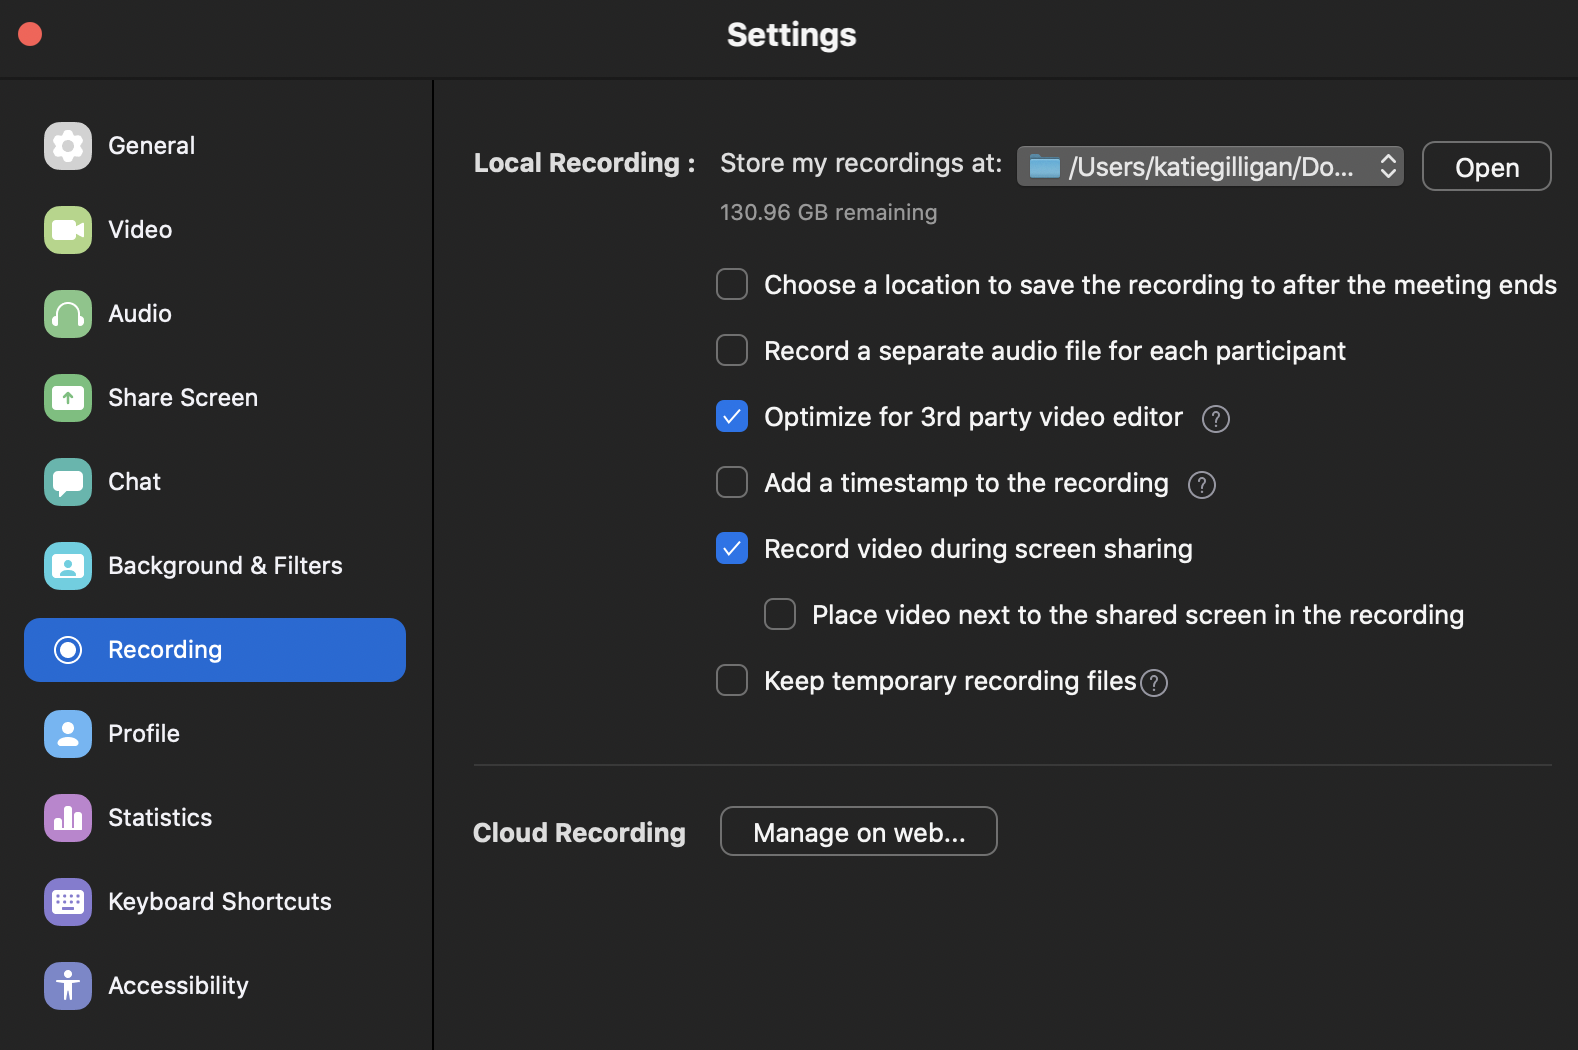 Your settings should look like this